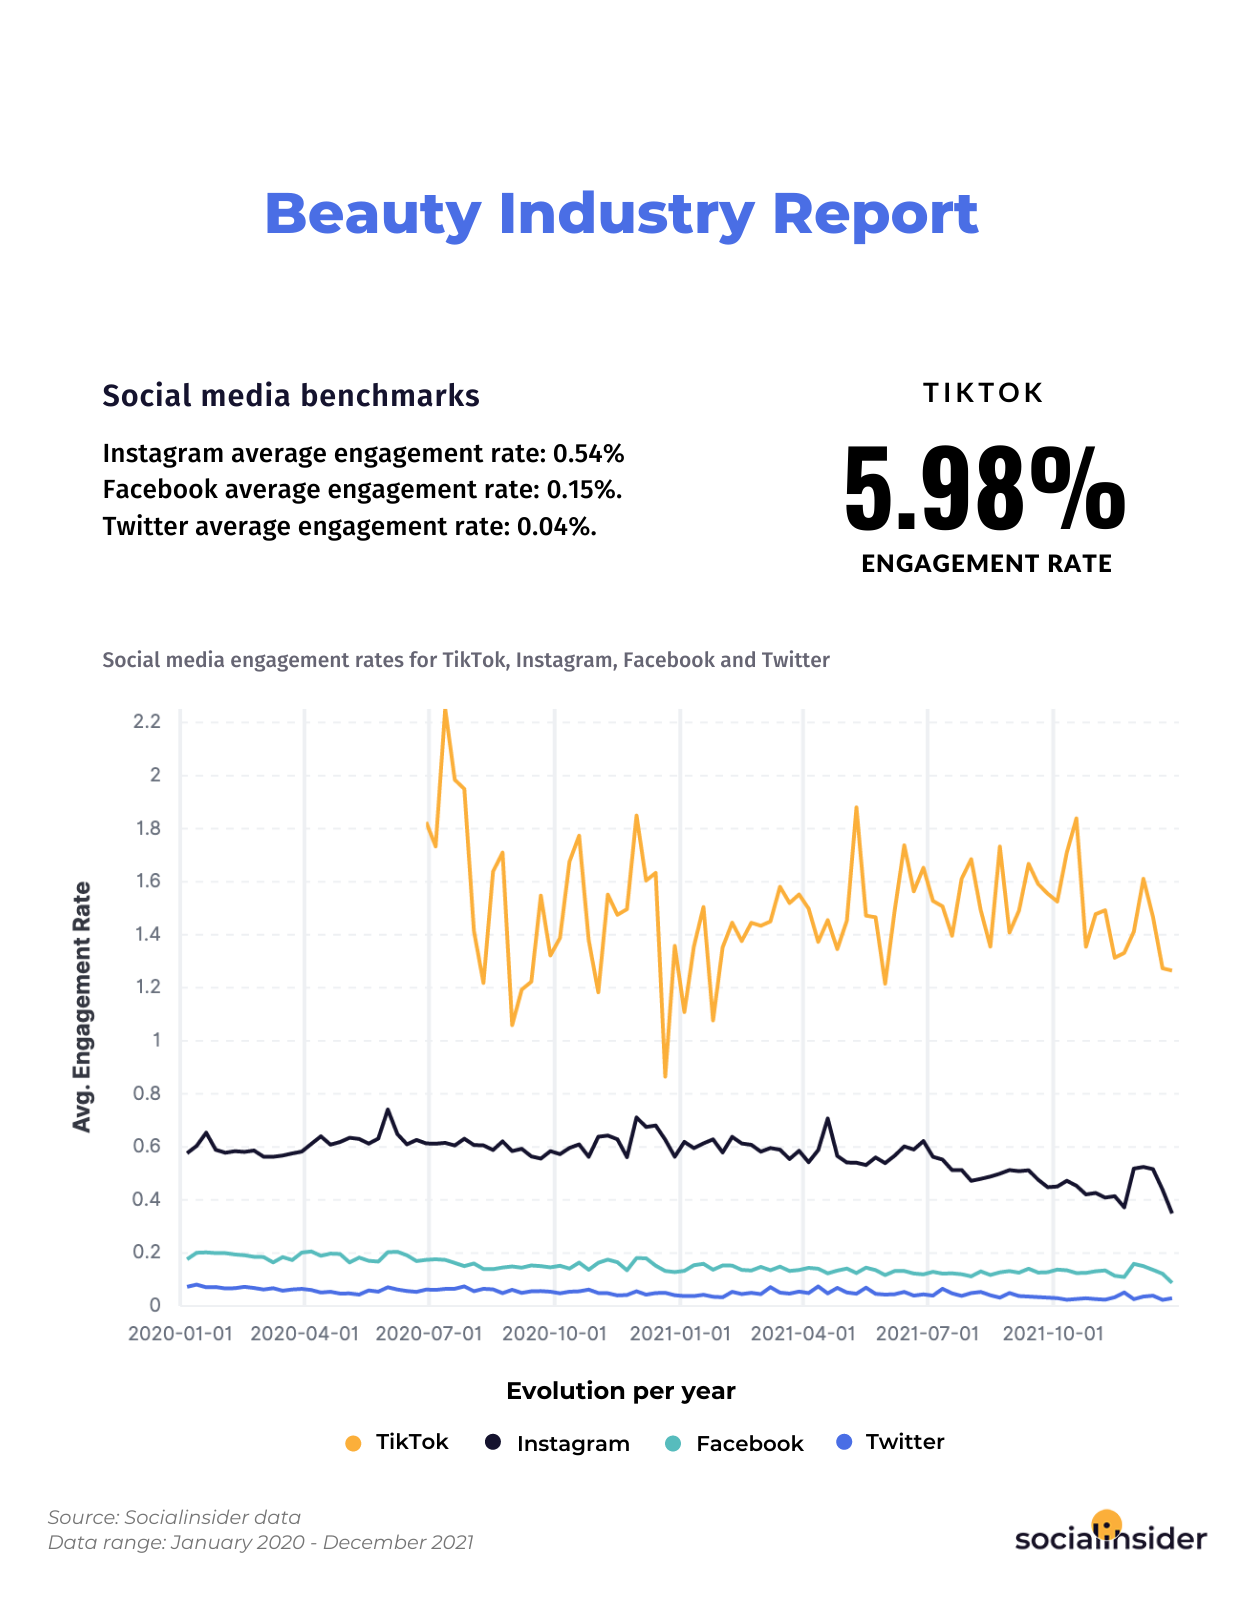 Engagement rates for the beauty industry in 2022